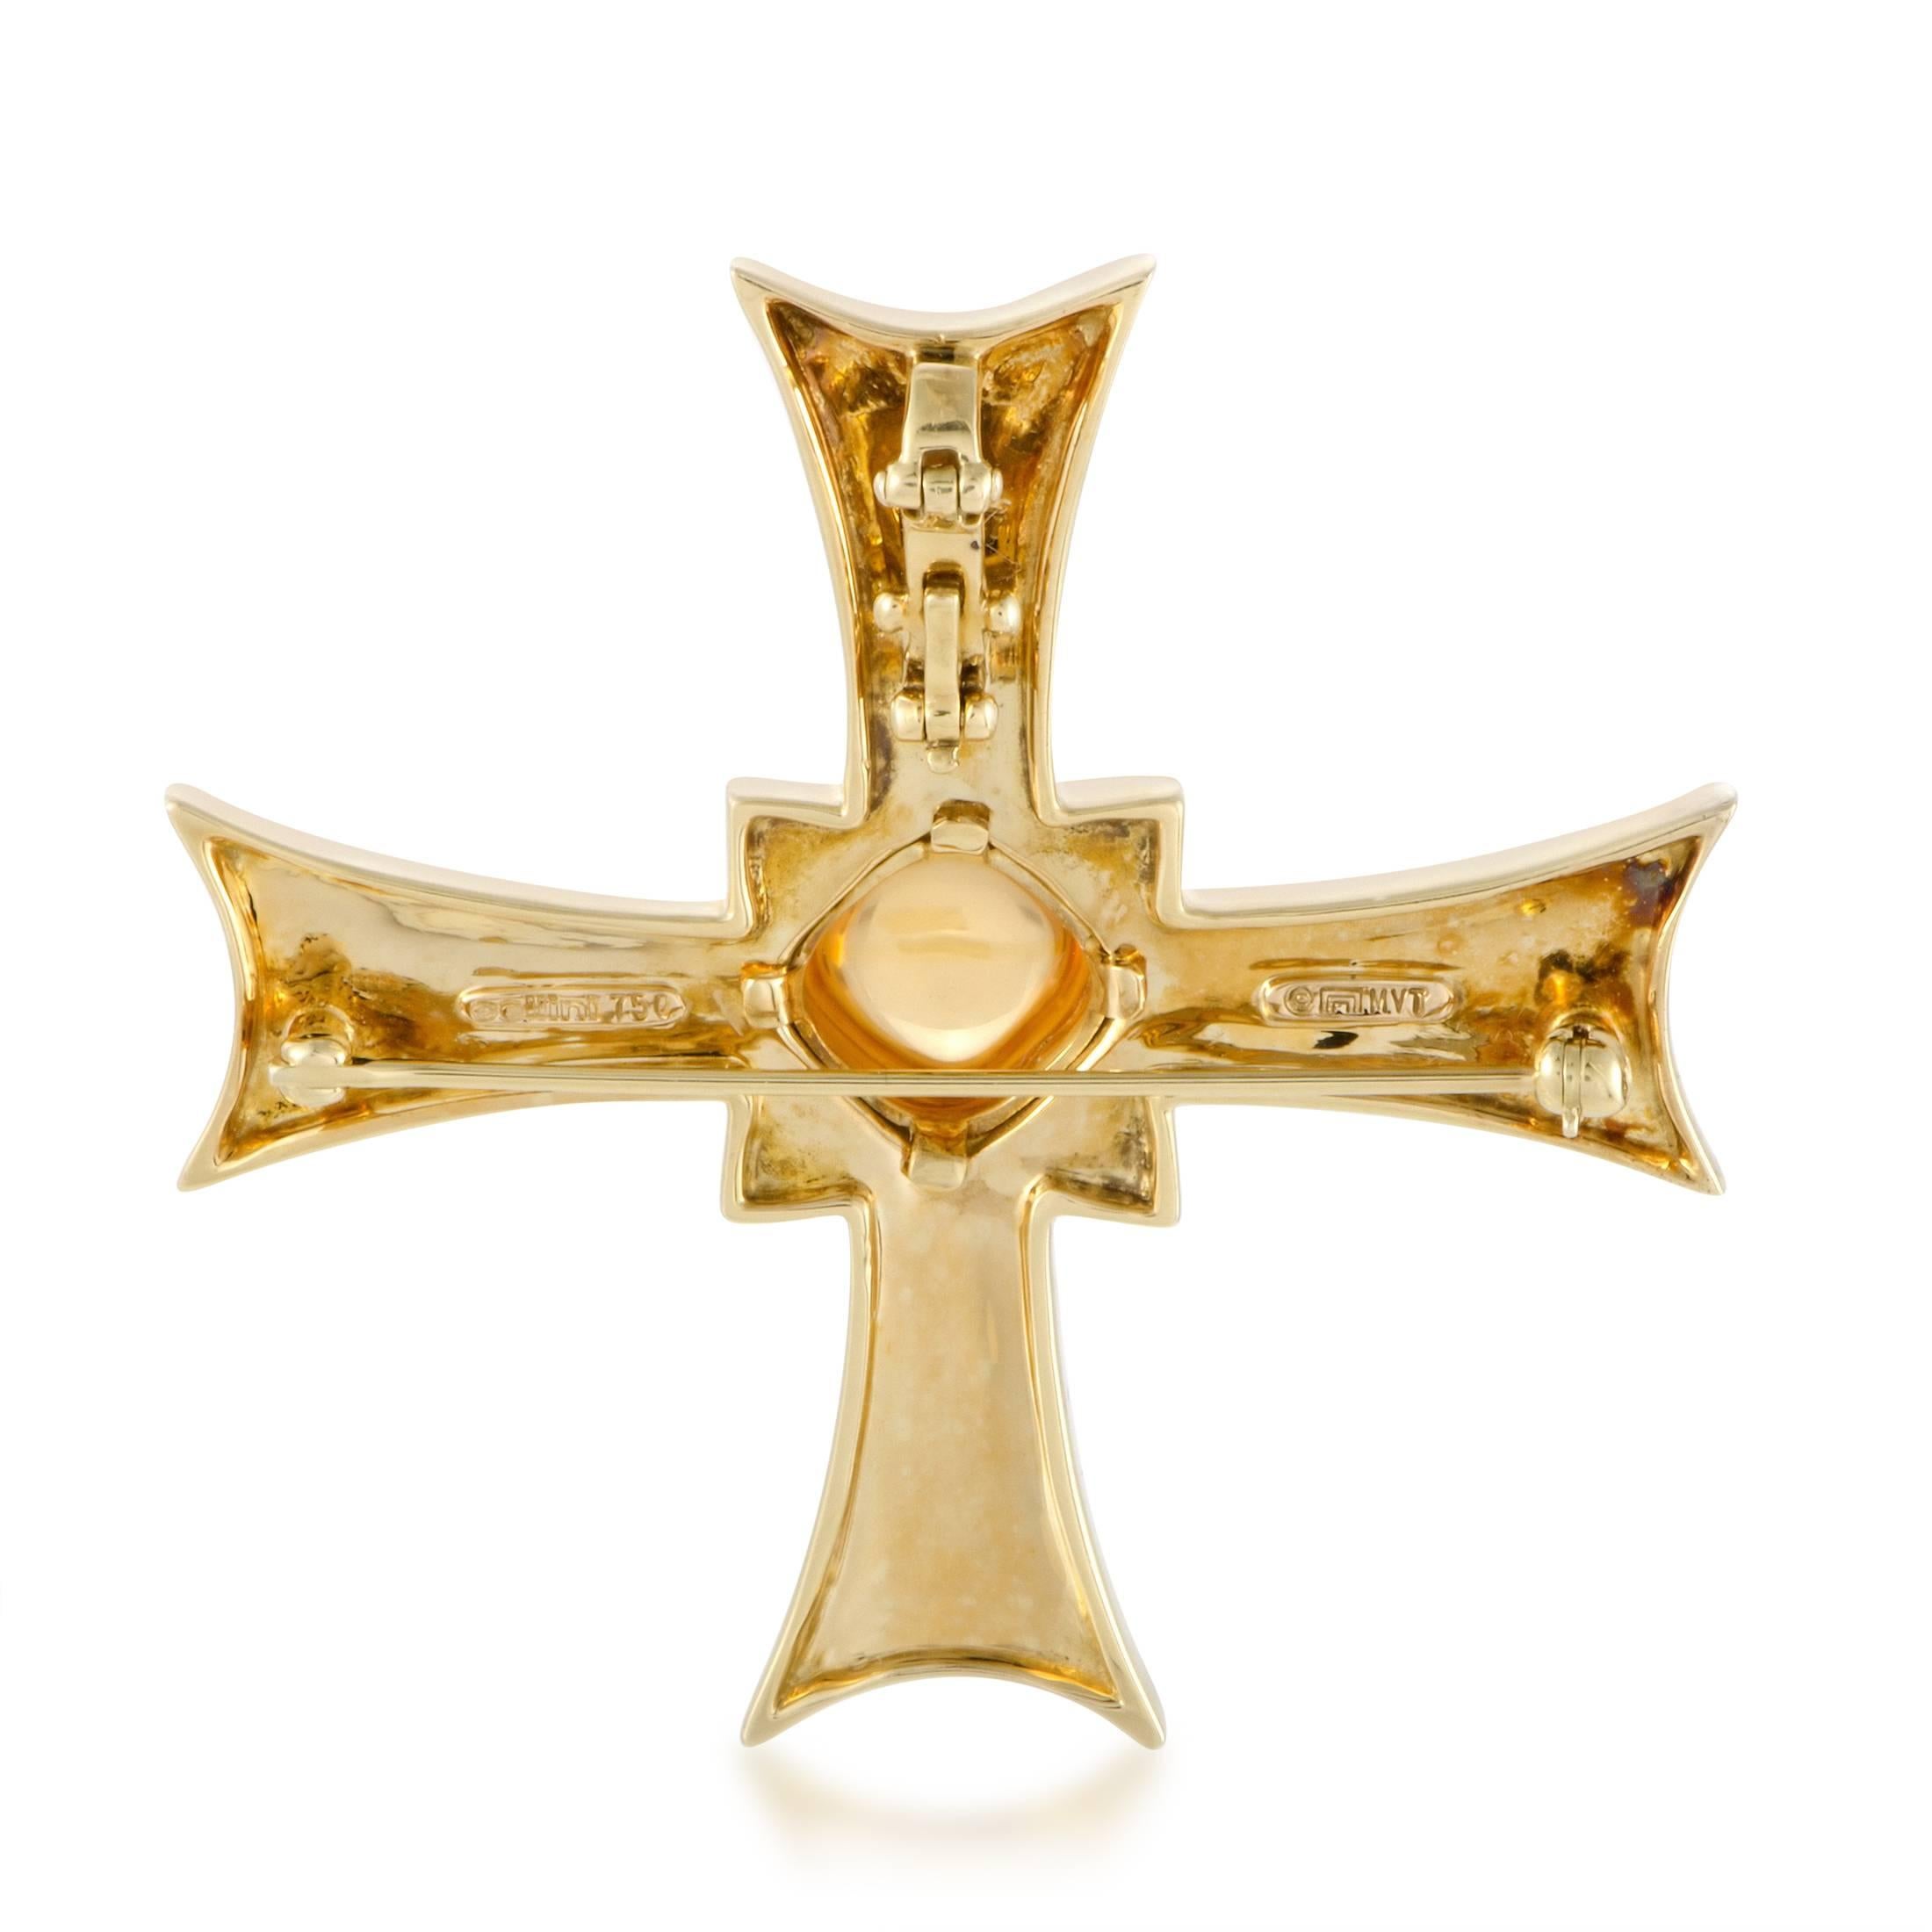 Boasting eye-catching appeal thanks to marvelously gleaming citrine and strikingly contrasting enamel, this marvelous pendant/brooch from Cellini is made of 18K yellow gold in the compelling form of the peaceful cross.
